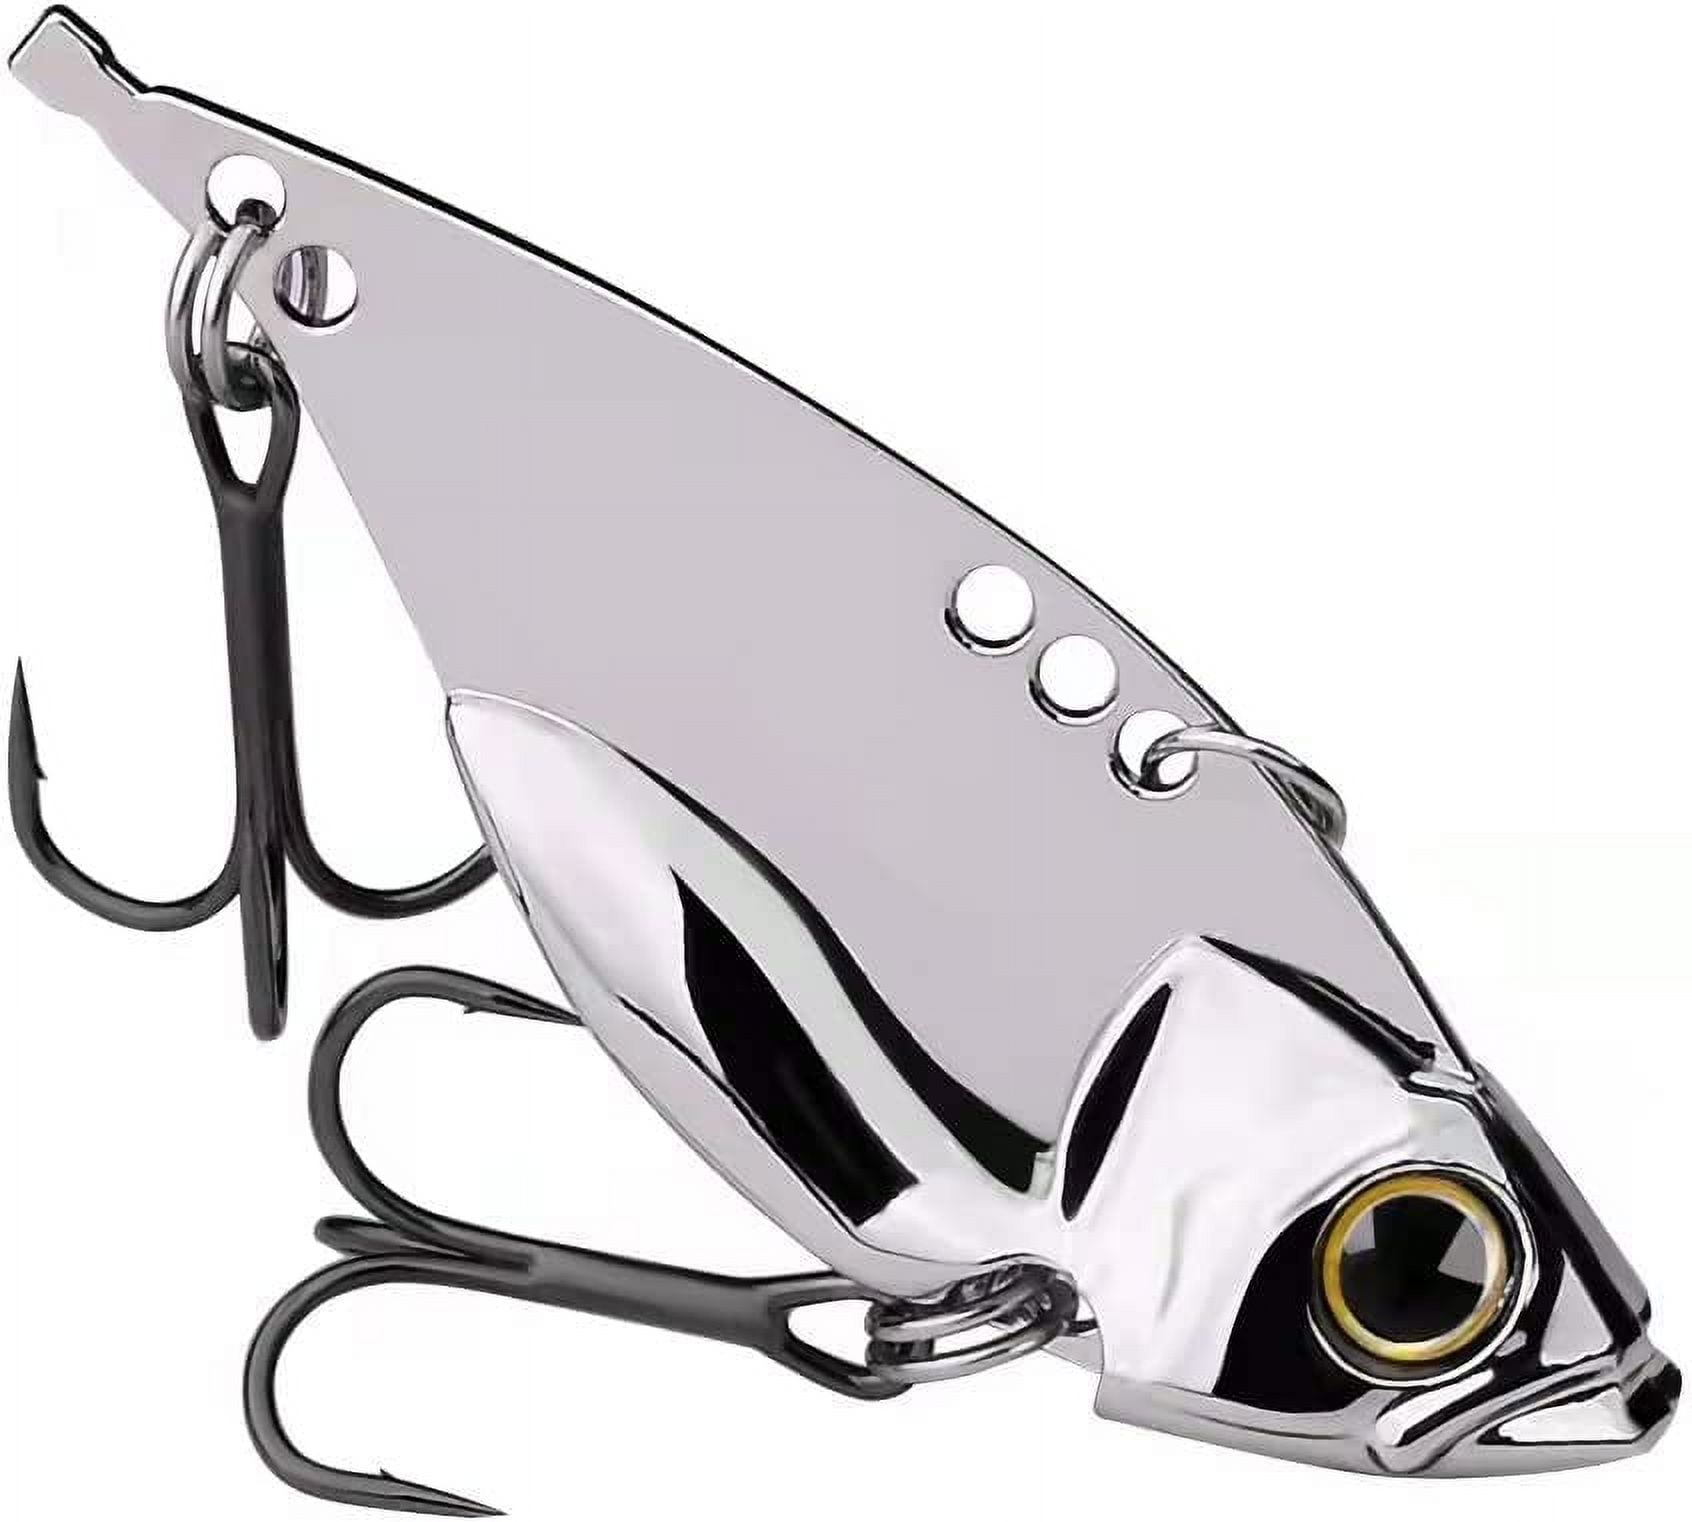 LUCKYMEOW Blade Lures for bass,Fishing Lures,Metal VIB Hard